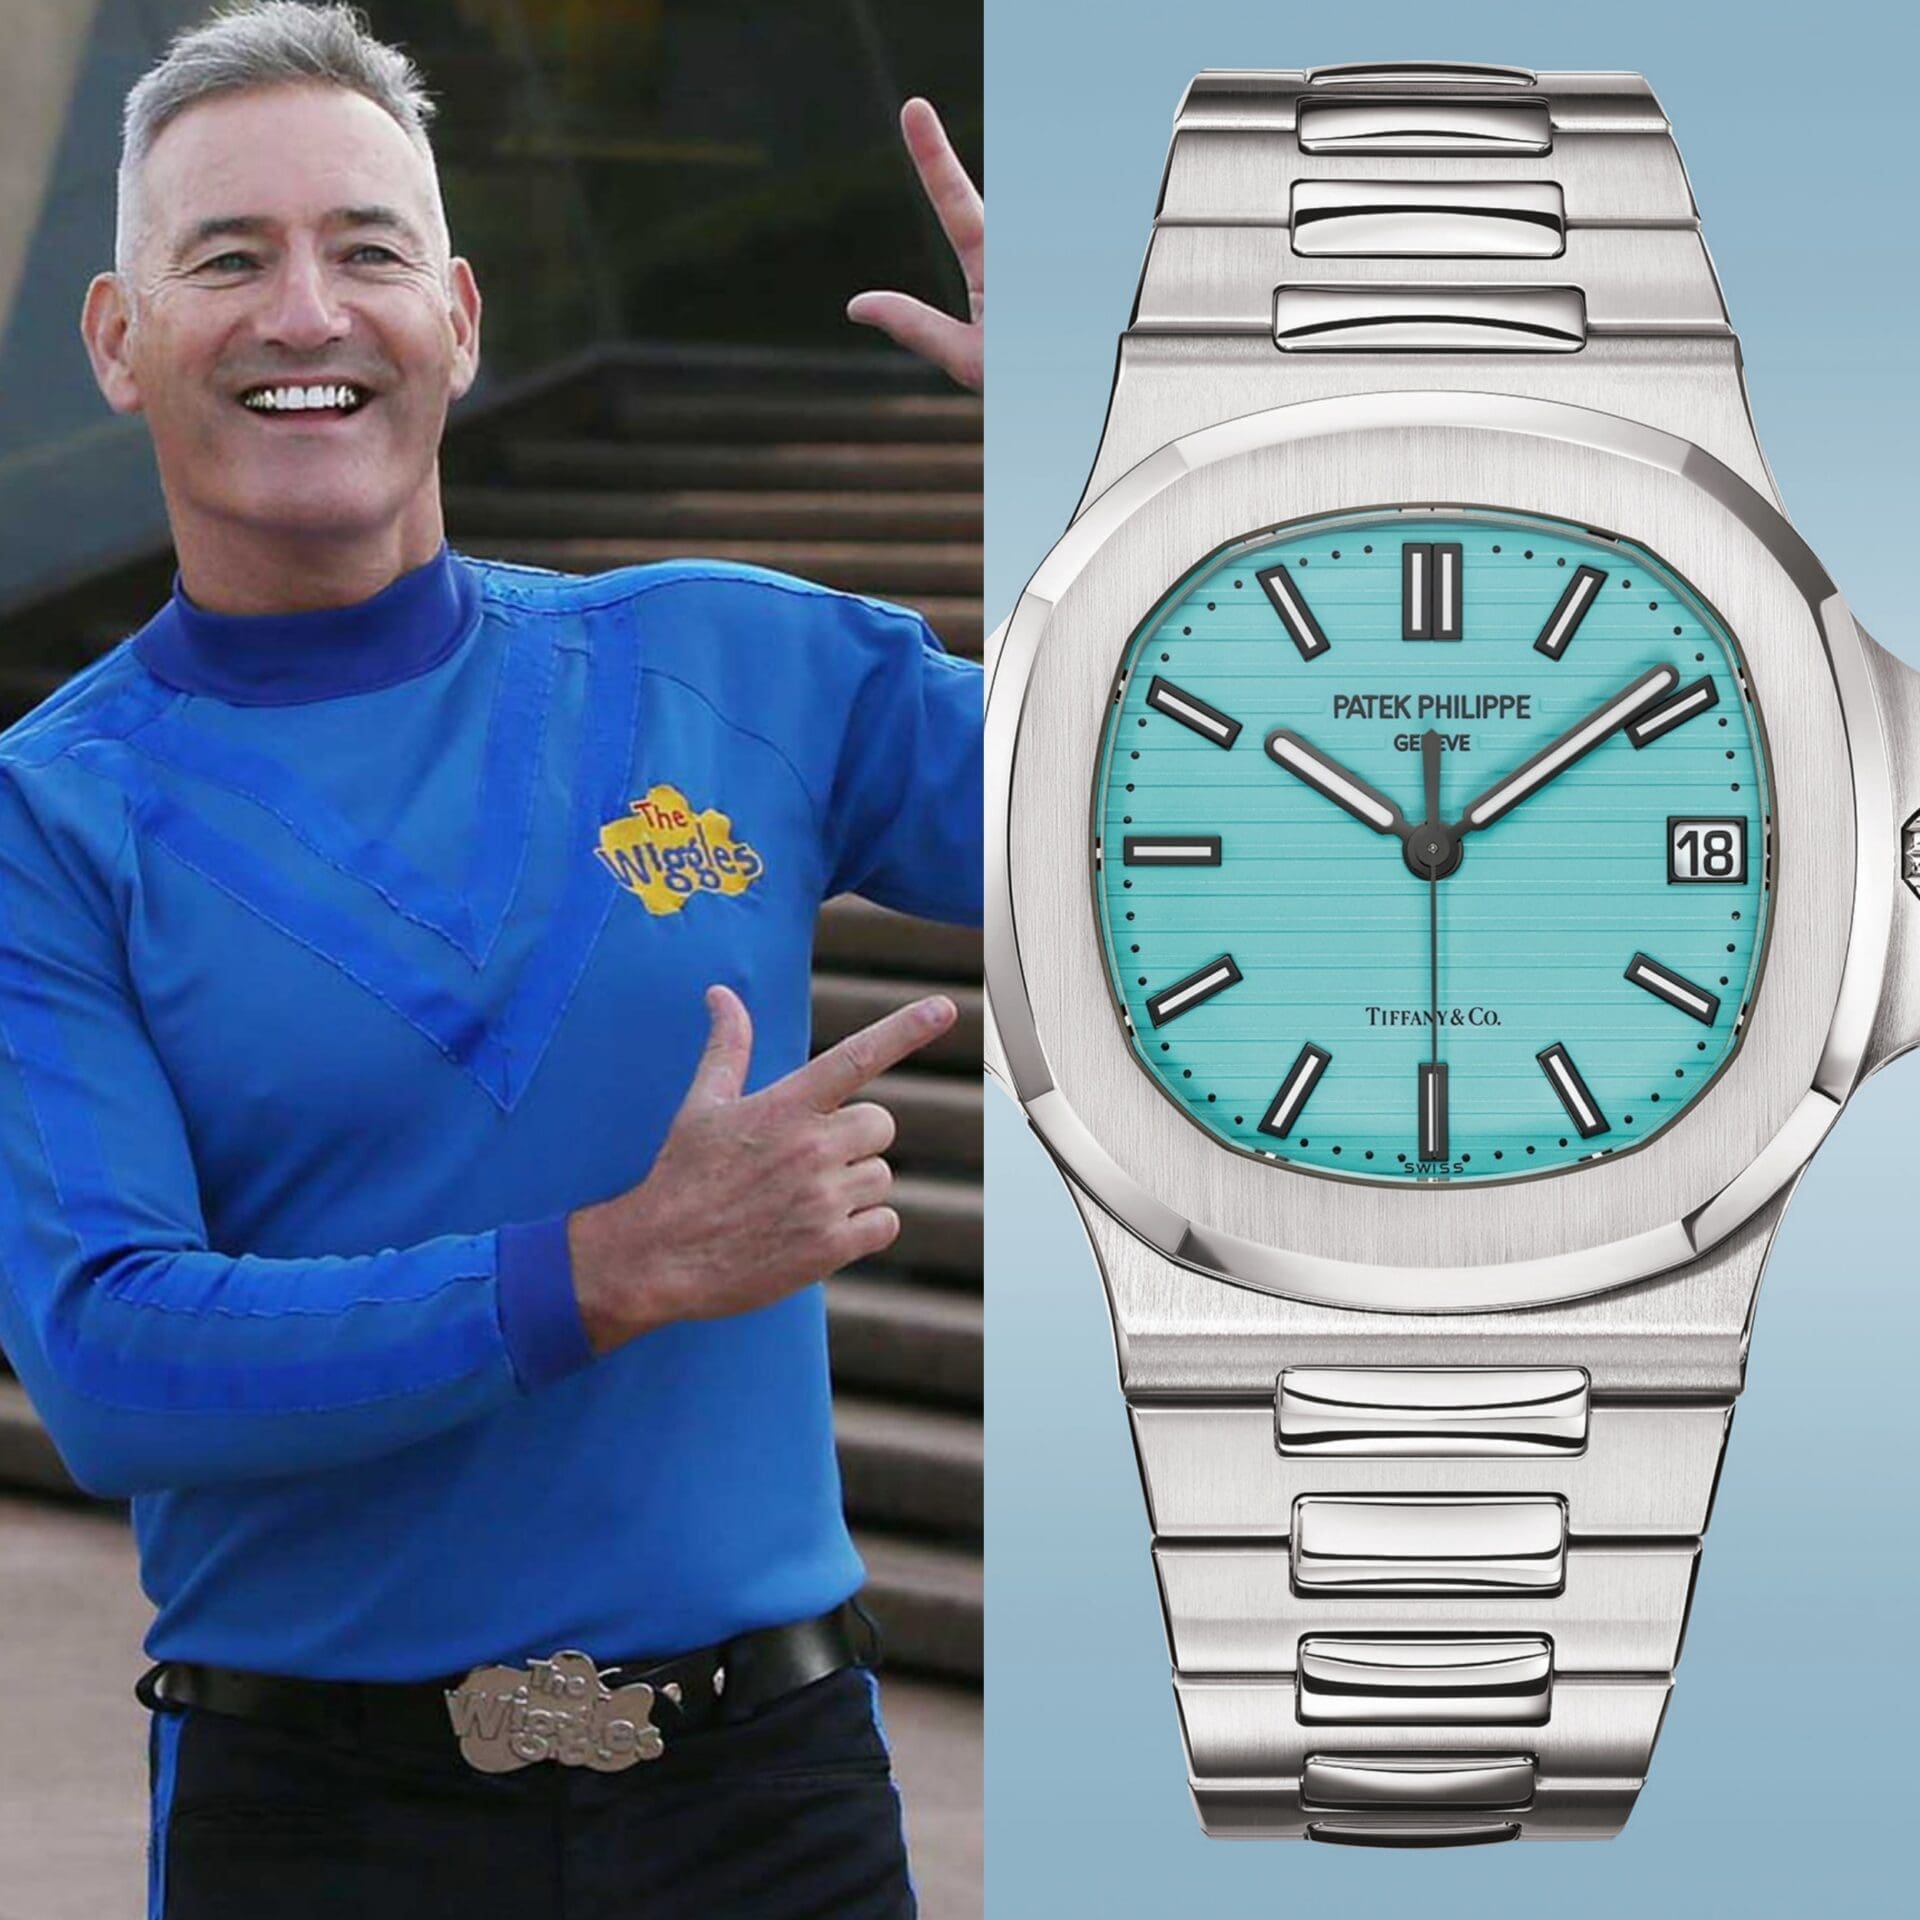 “I promise I don’t have a real Patek.” OK, this is weird, Anthony the Blue Wiggle insists his watches are fake